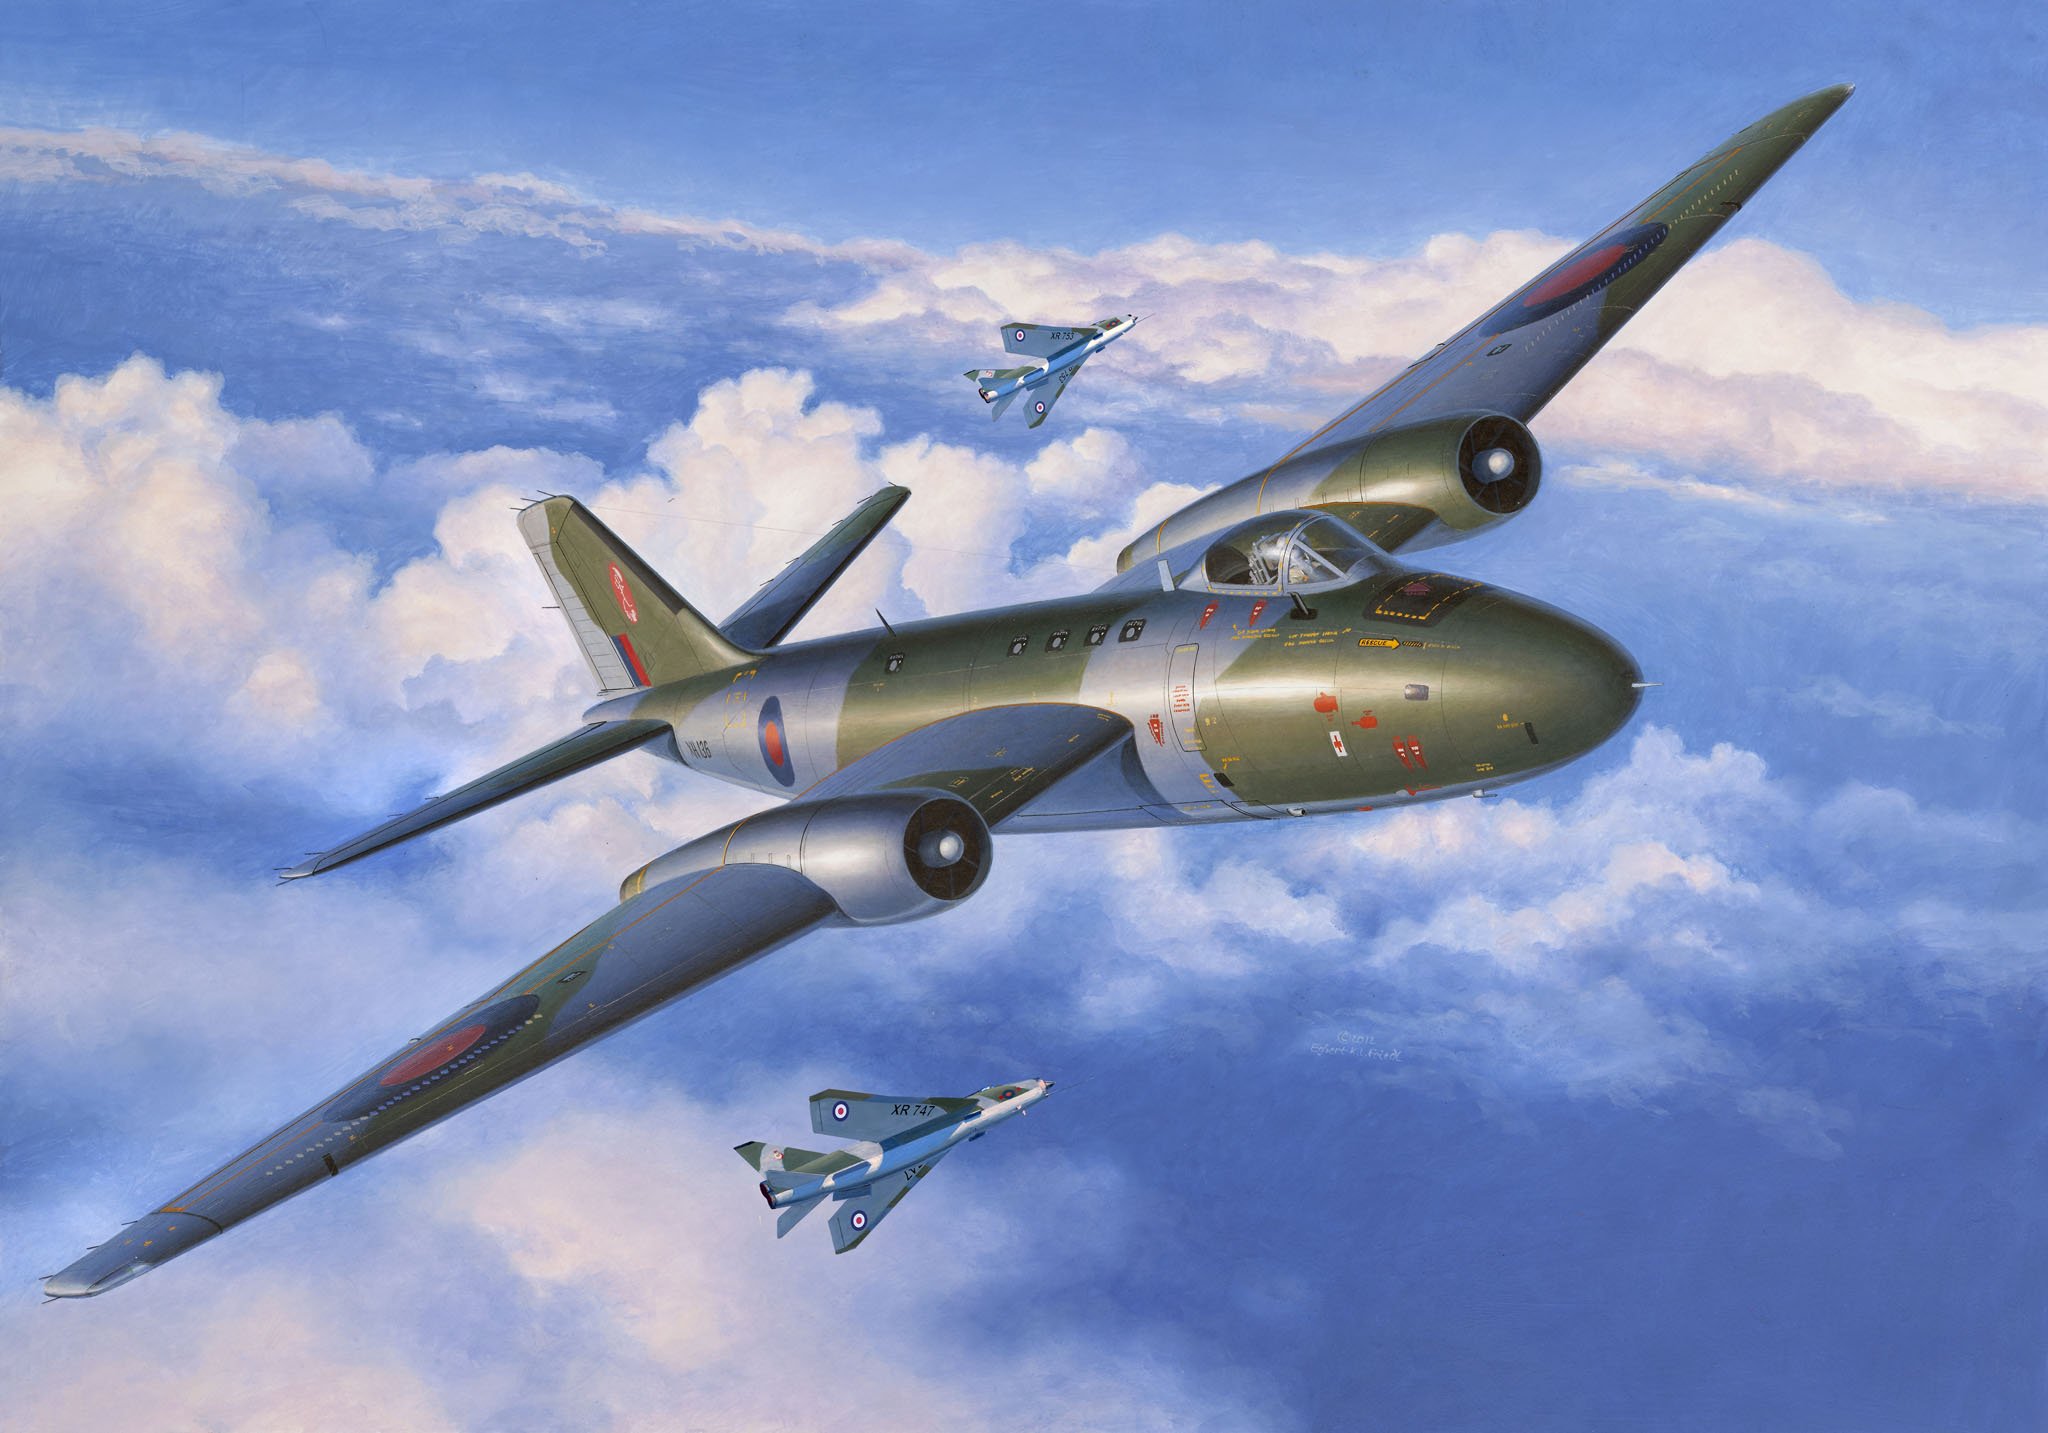 General 2048x1433 aircraft sky flying military clouds military aircraft military vehicle pilot artwork English Electric Canberra English Electric Lightning Royal Air Force Royal Navy Bomber jet fighter